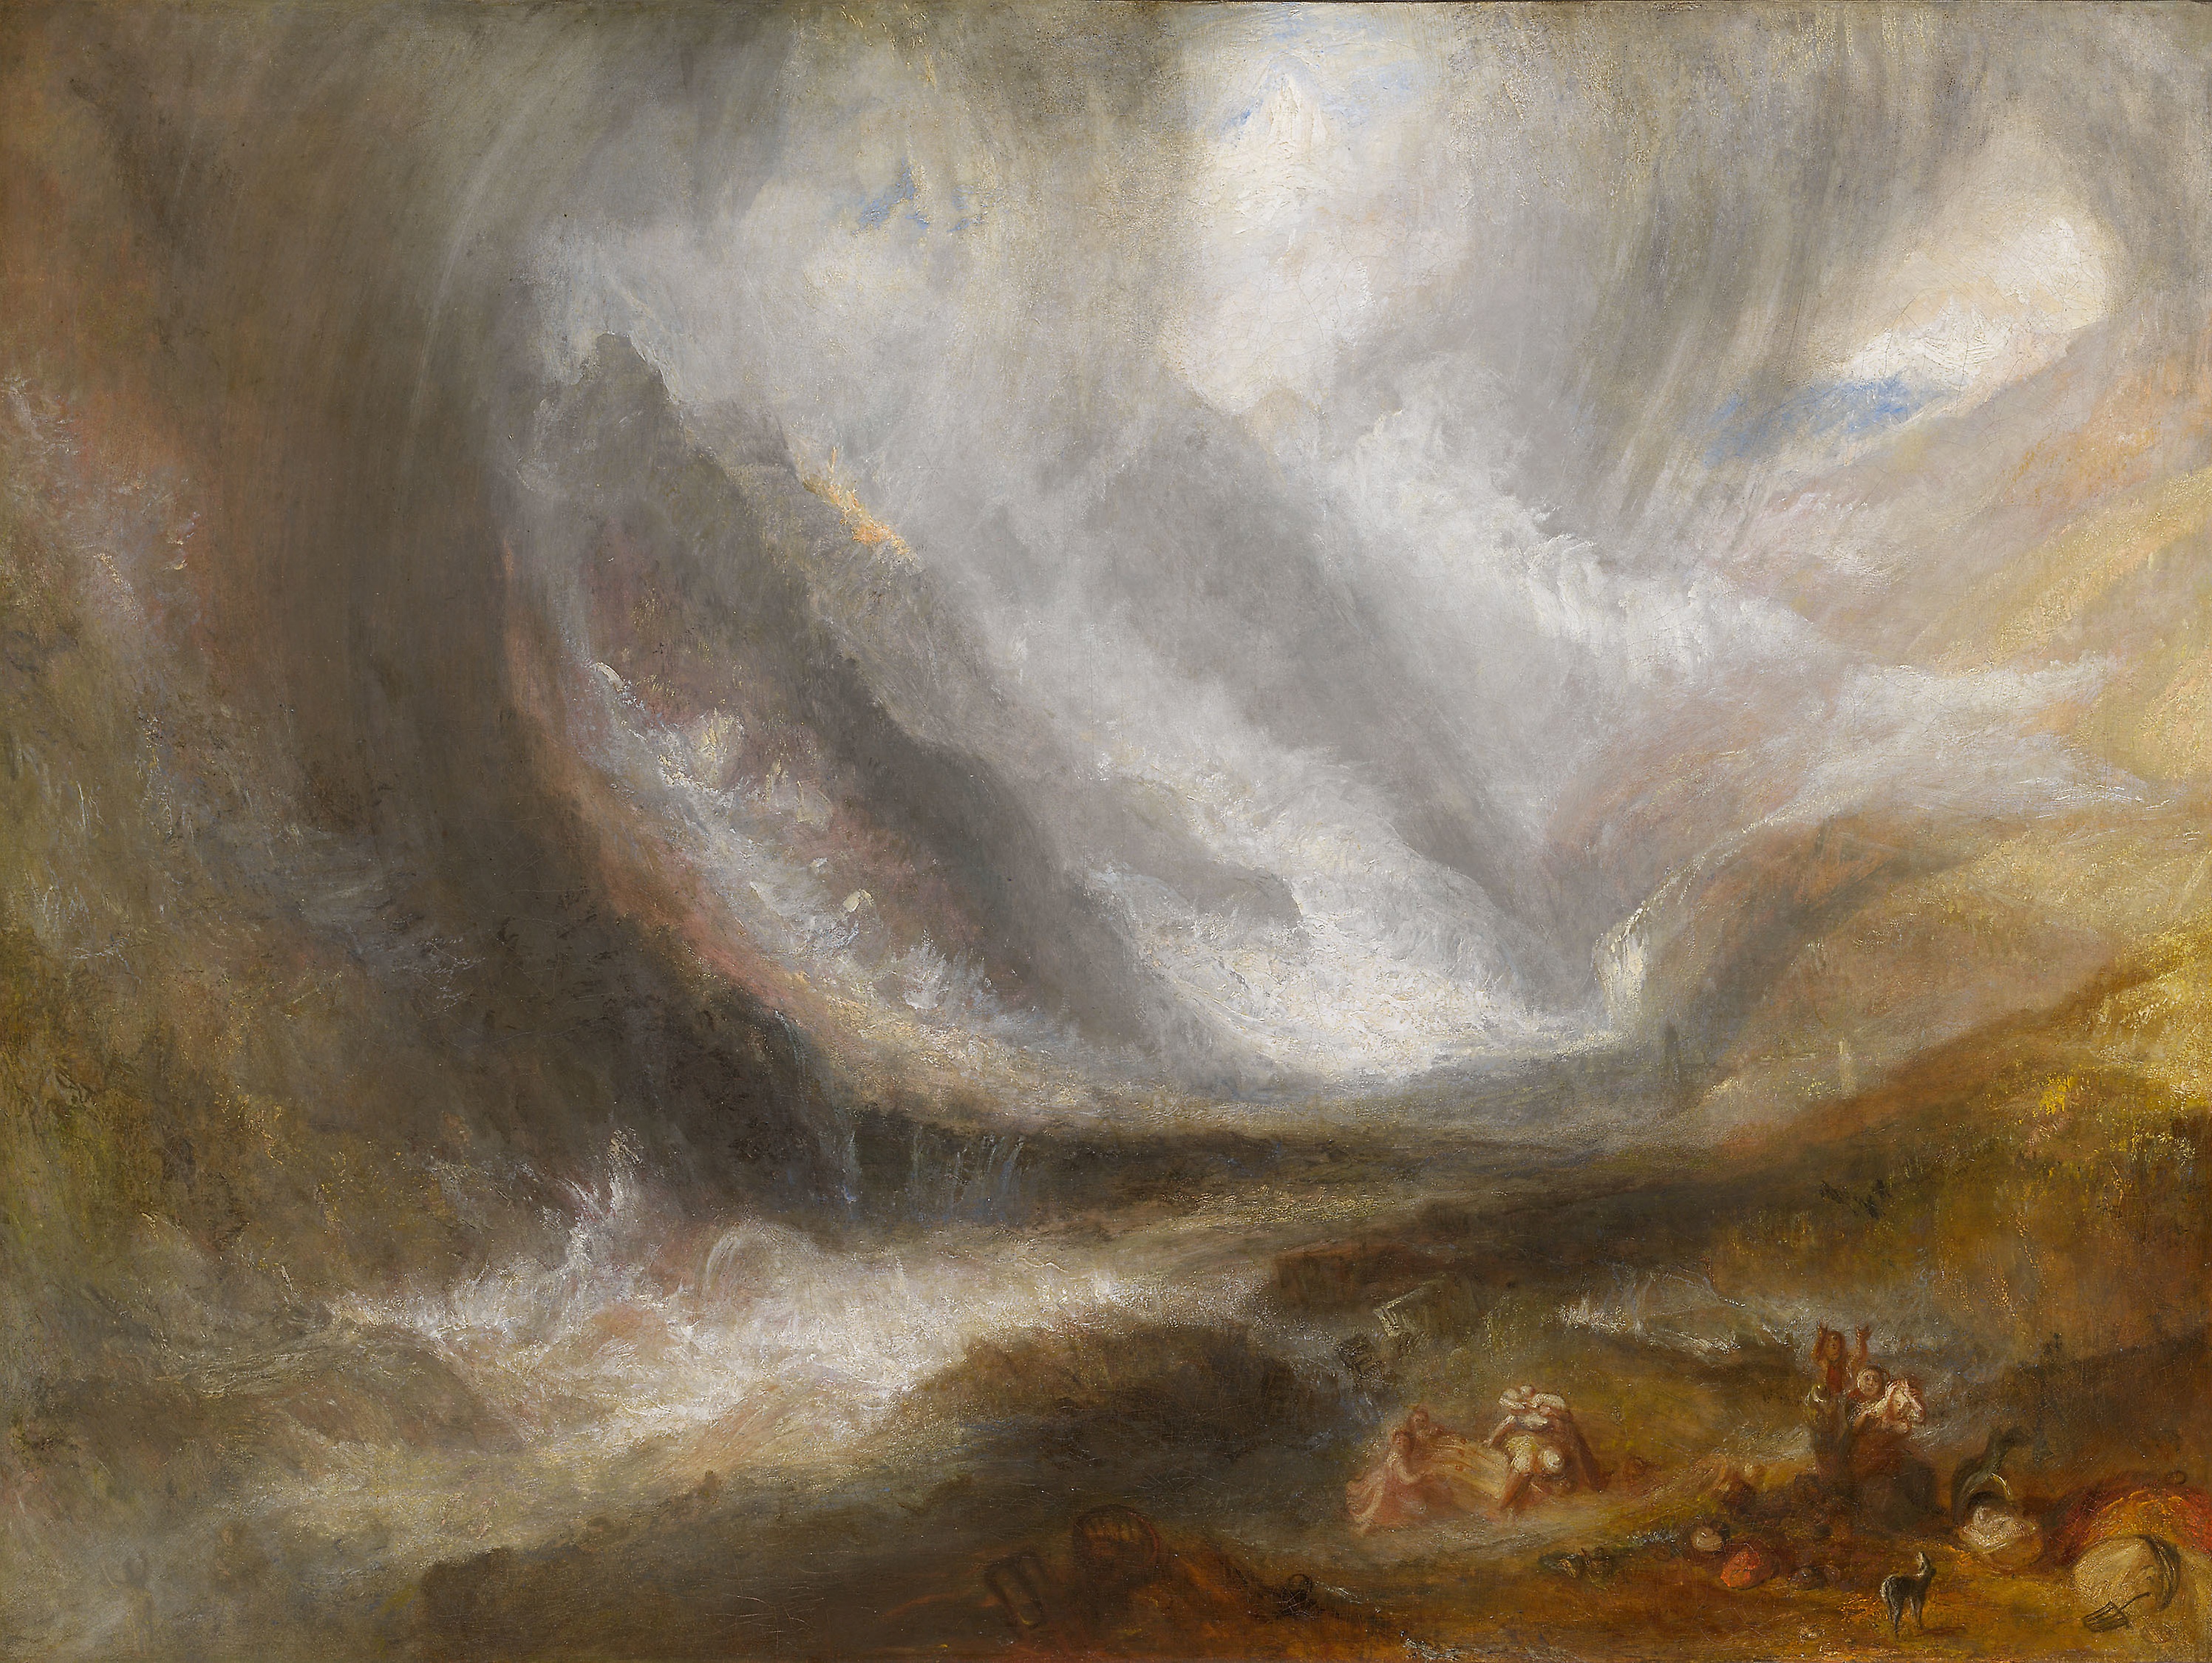 Valley of Aosta: Snowstorm, Avalanche, and Thunderstorm (1837).